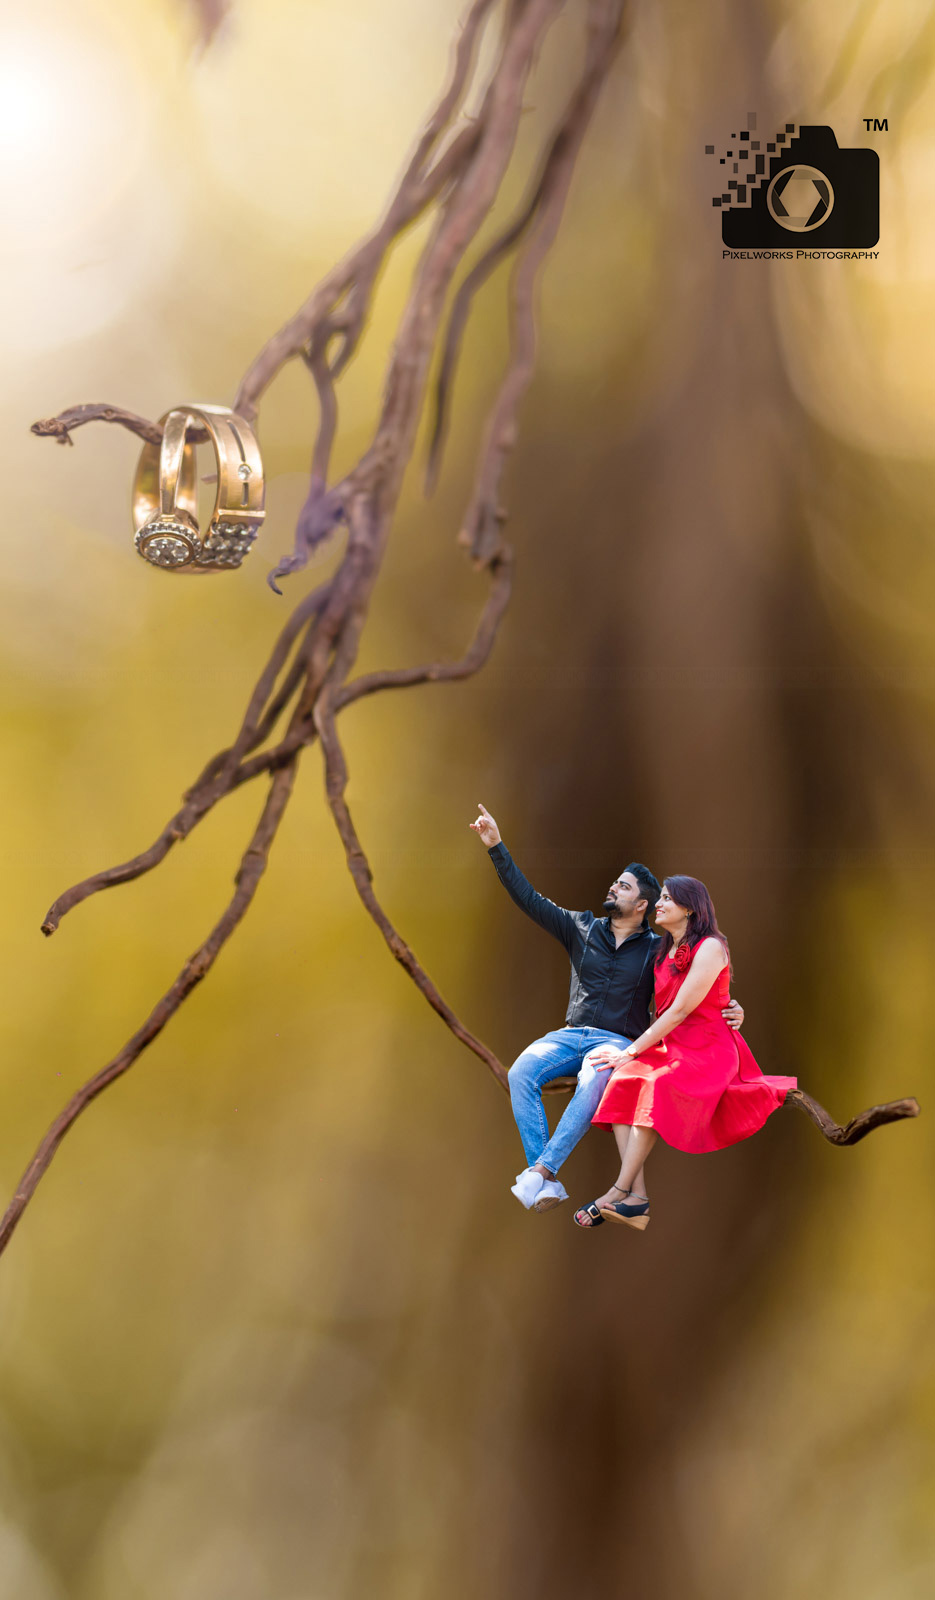 34 Pre wedding shoot ideas for Couple photoshoot (Updated for 2020)